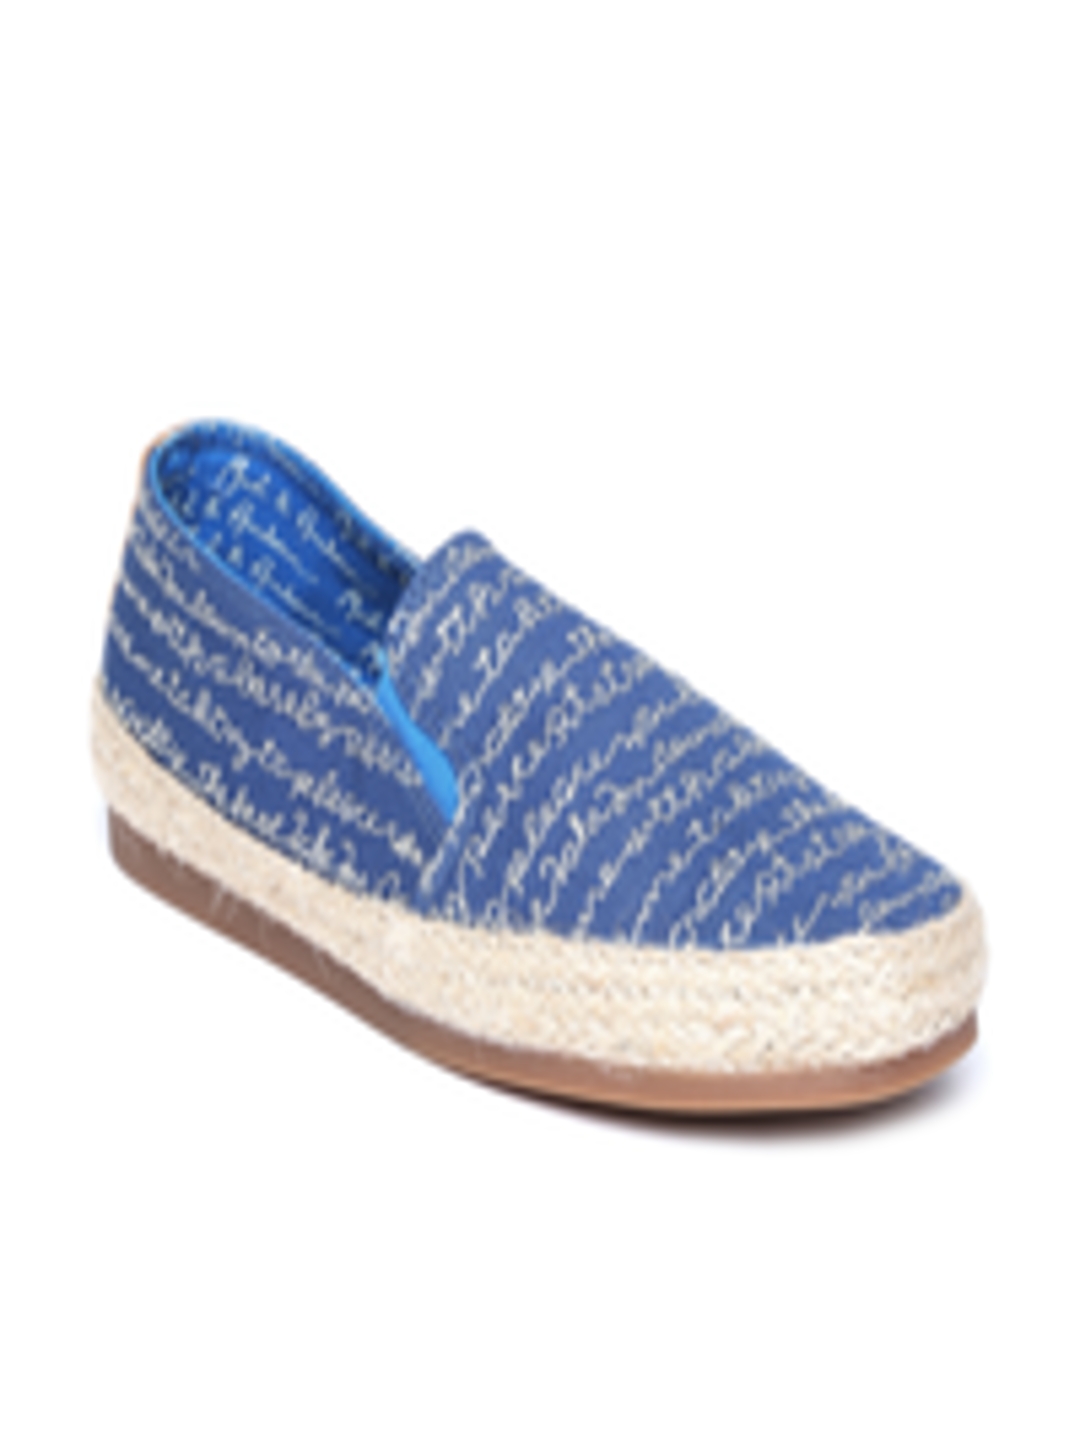 Buy Mast & Harbour Unisex Blue Embroidered Casual Shoes - Casual Shoes ...